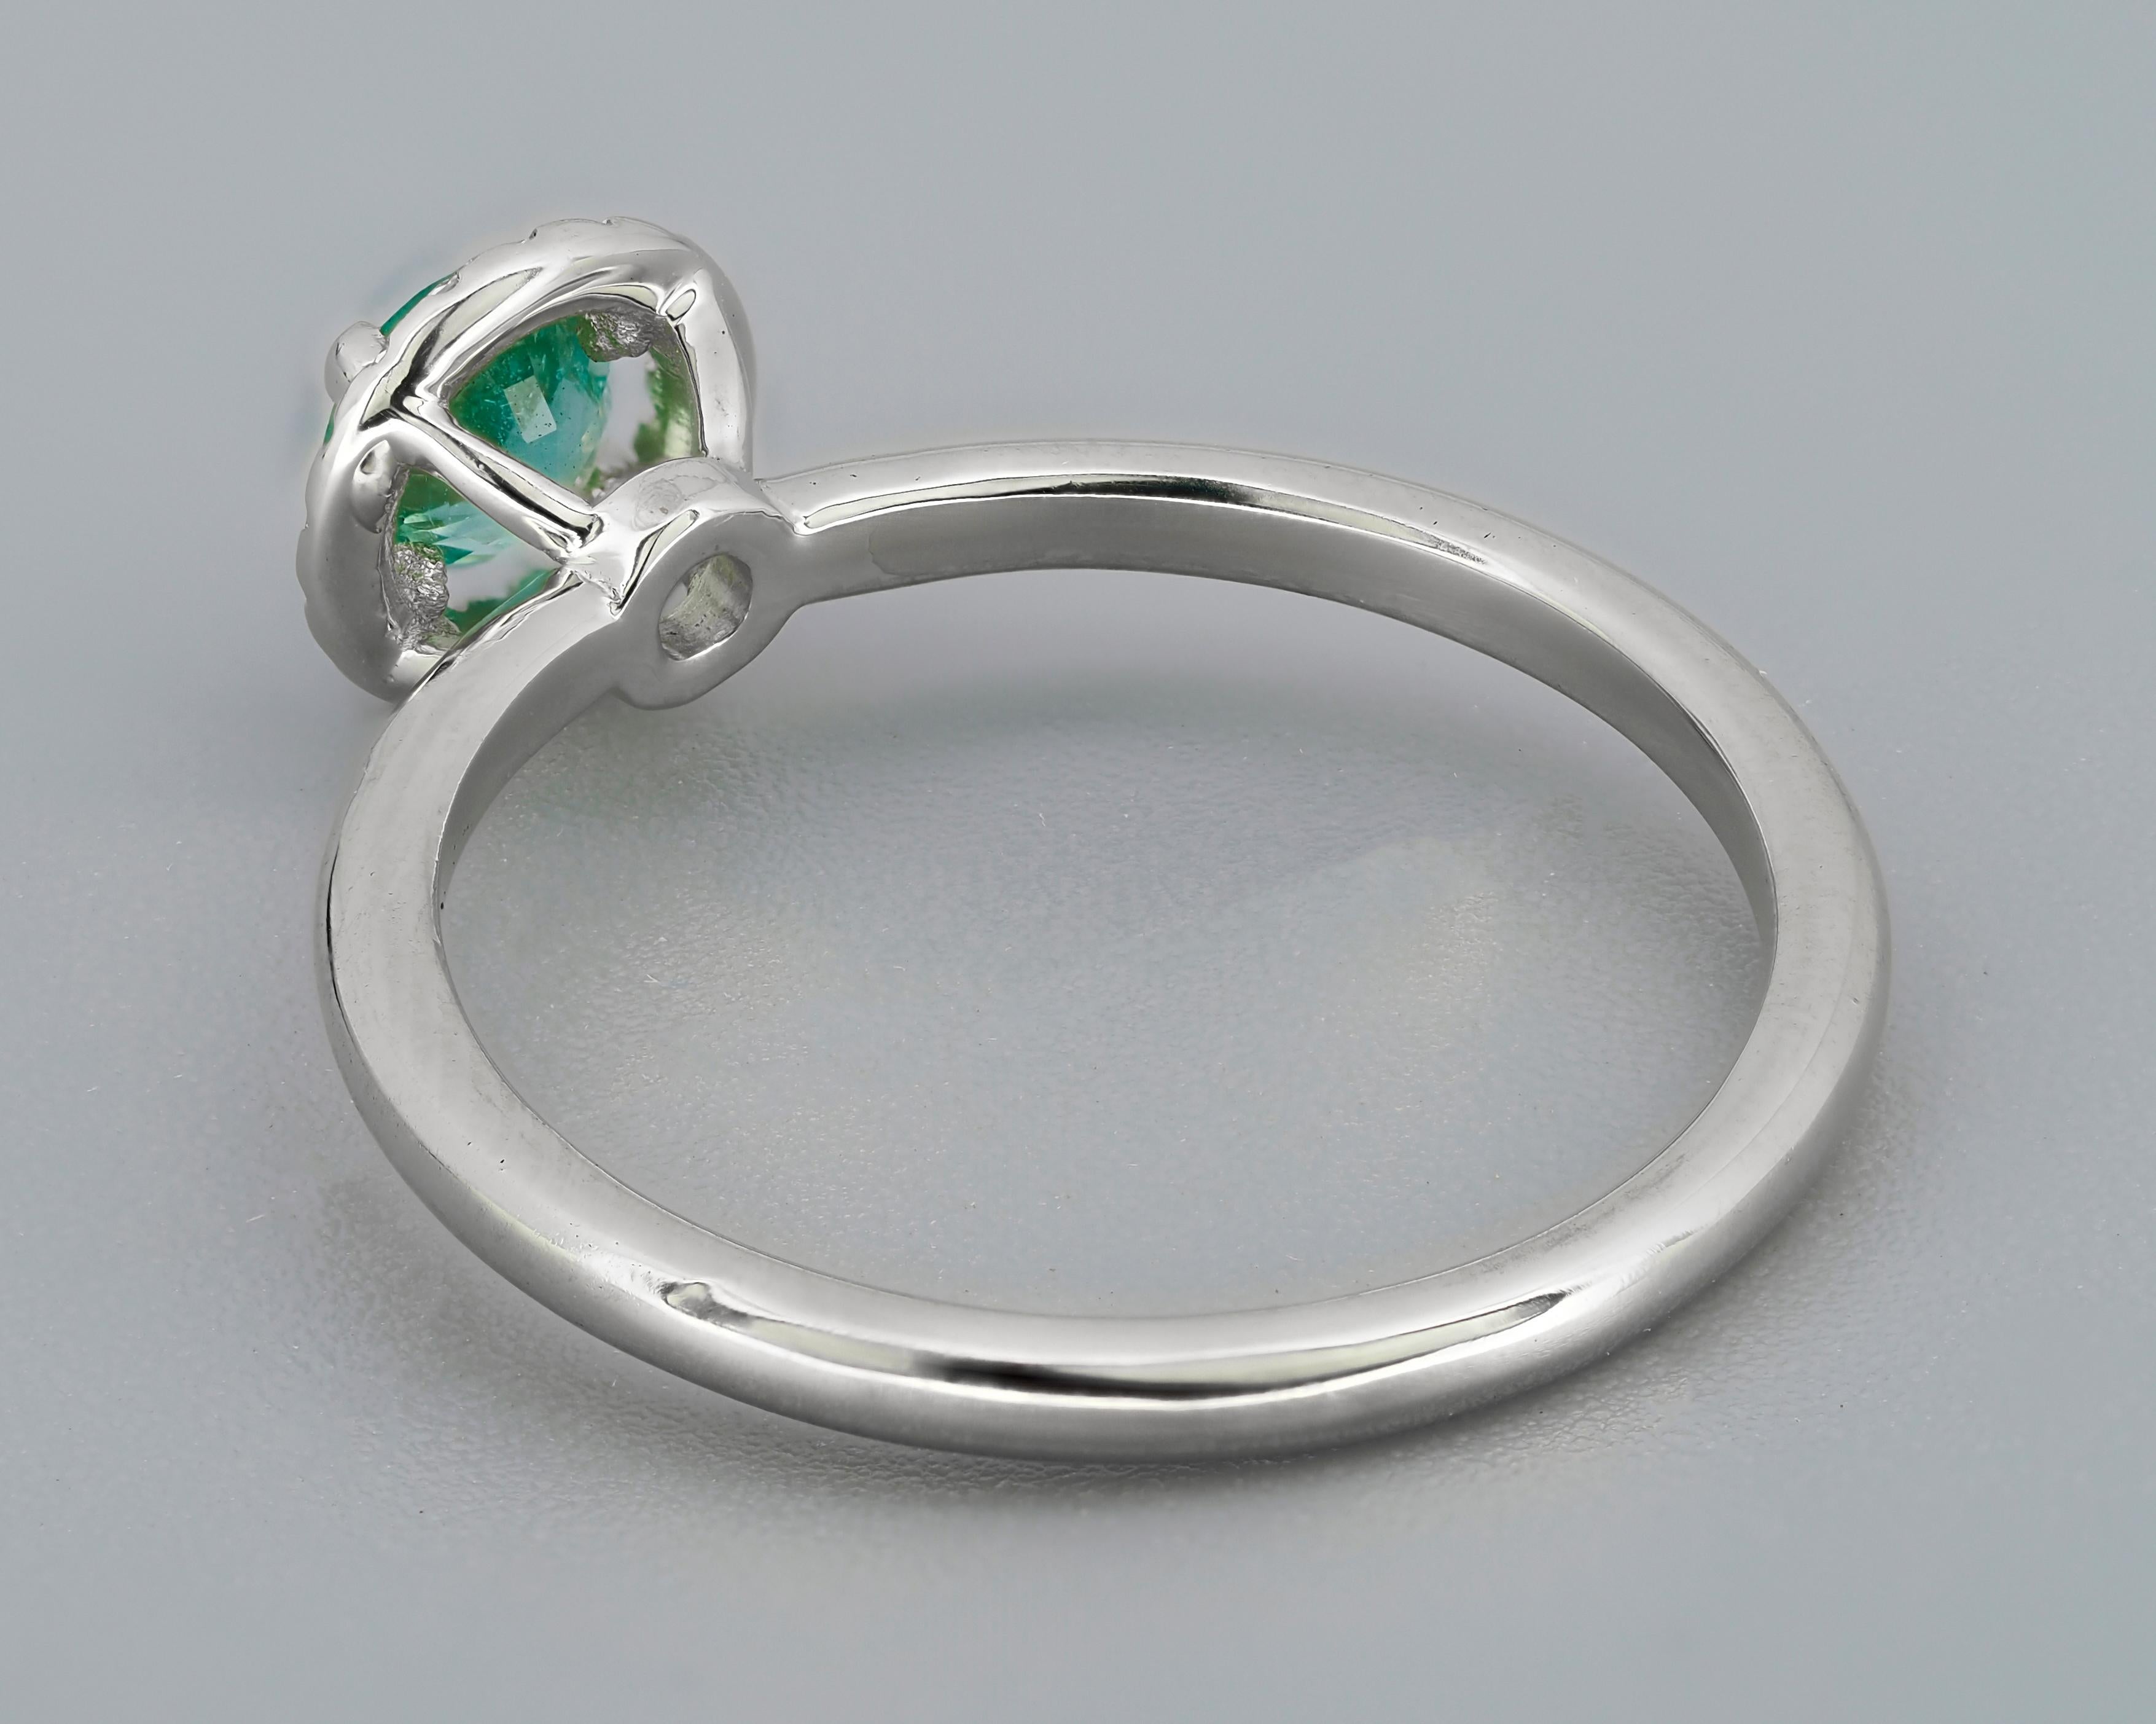 14k Gold Ring with Emerald and Diamonds, Emerald Halo Ring 1